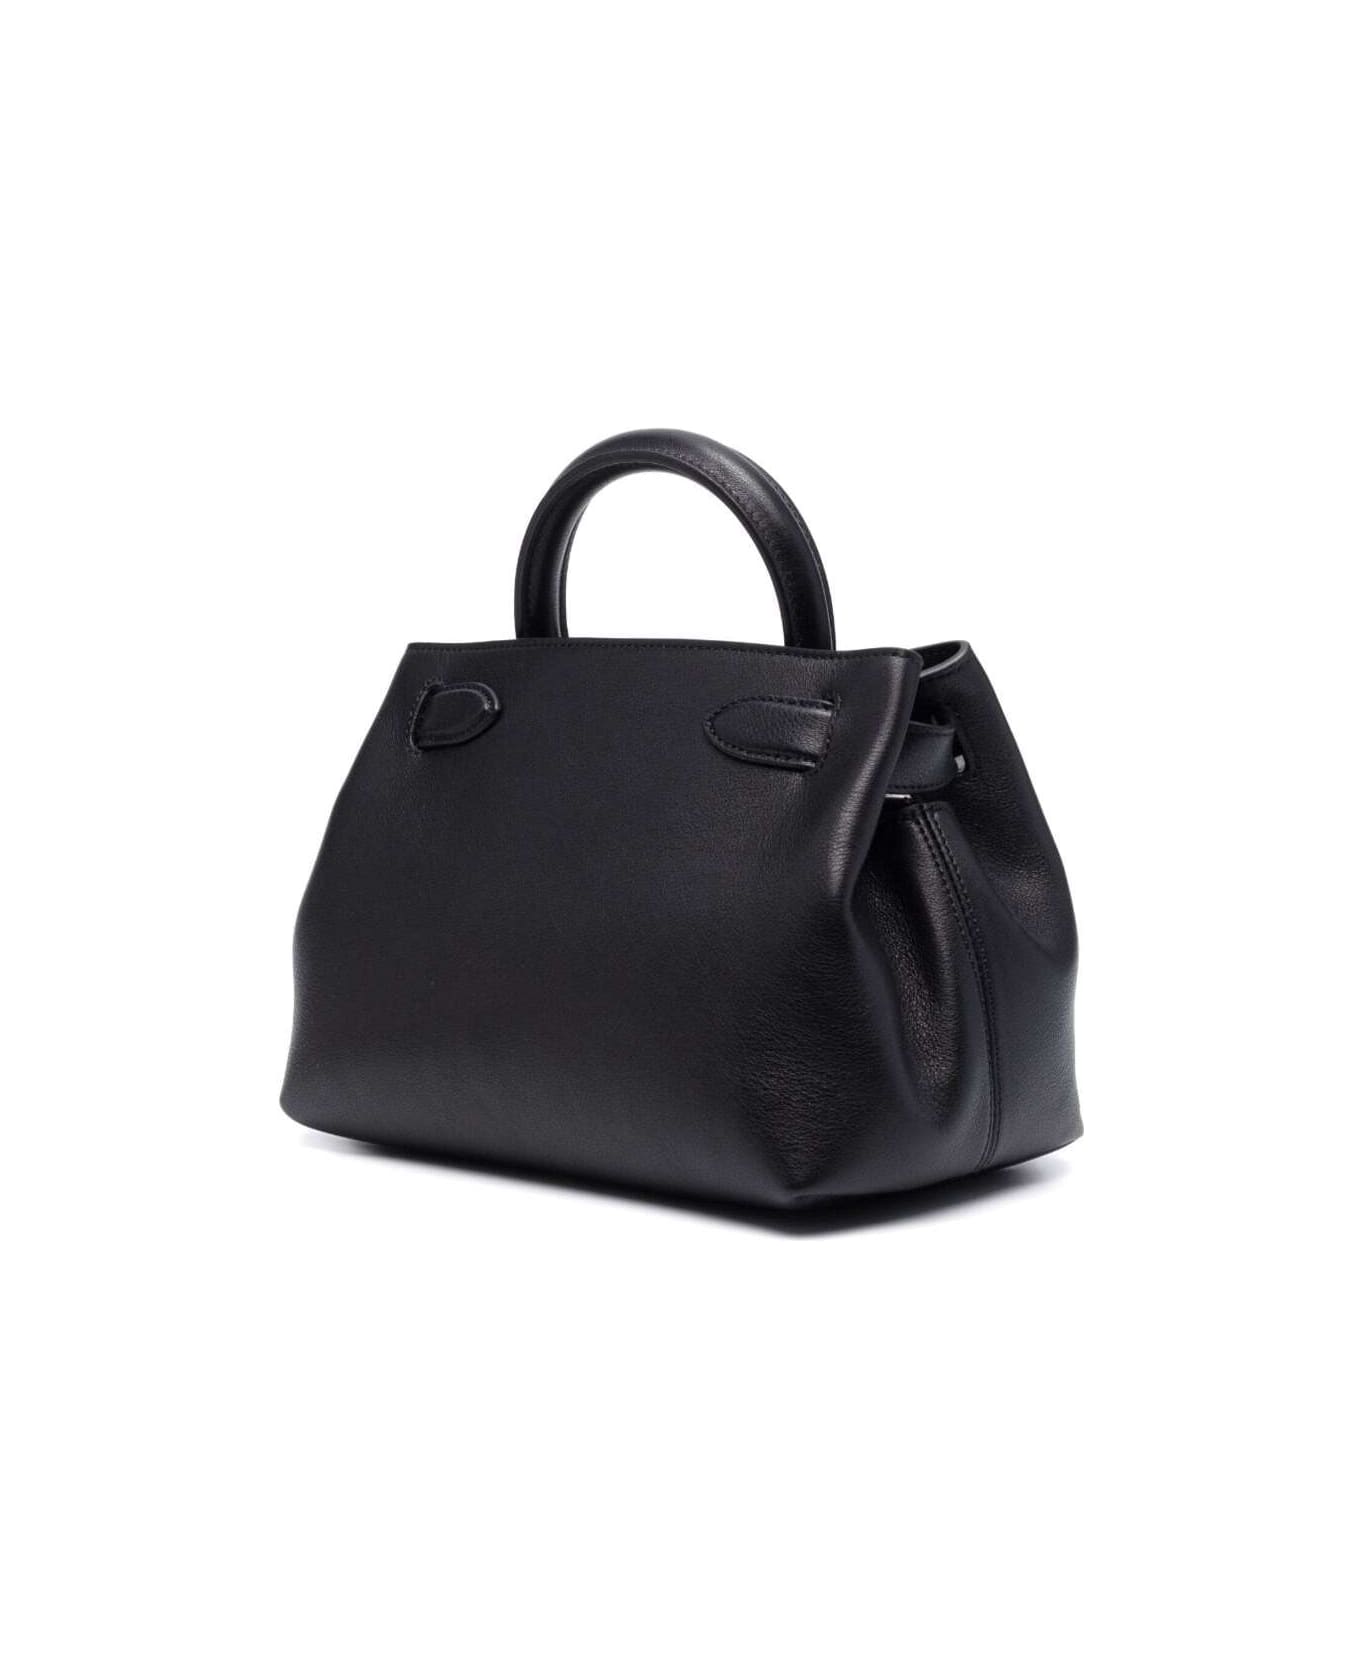 Mulberry Black Hand Bag With Single Handle And Gold-tone Details In Leather Woman - Black トートバッグ